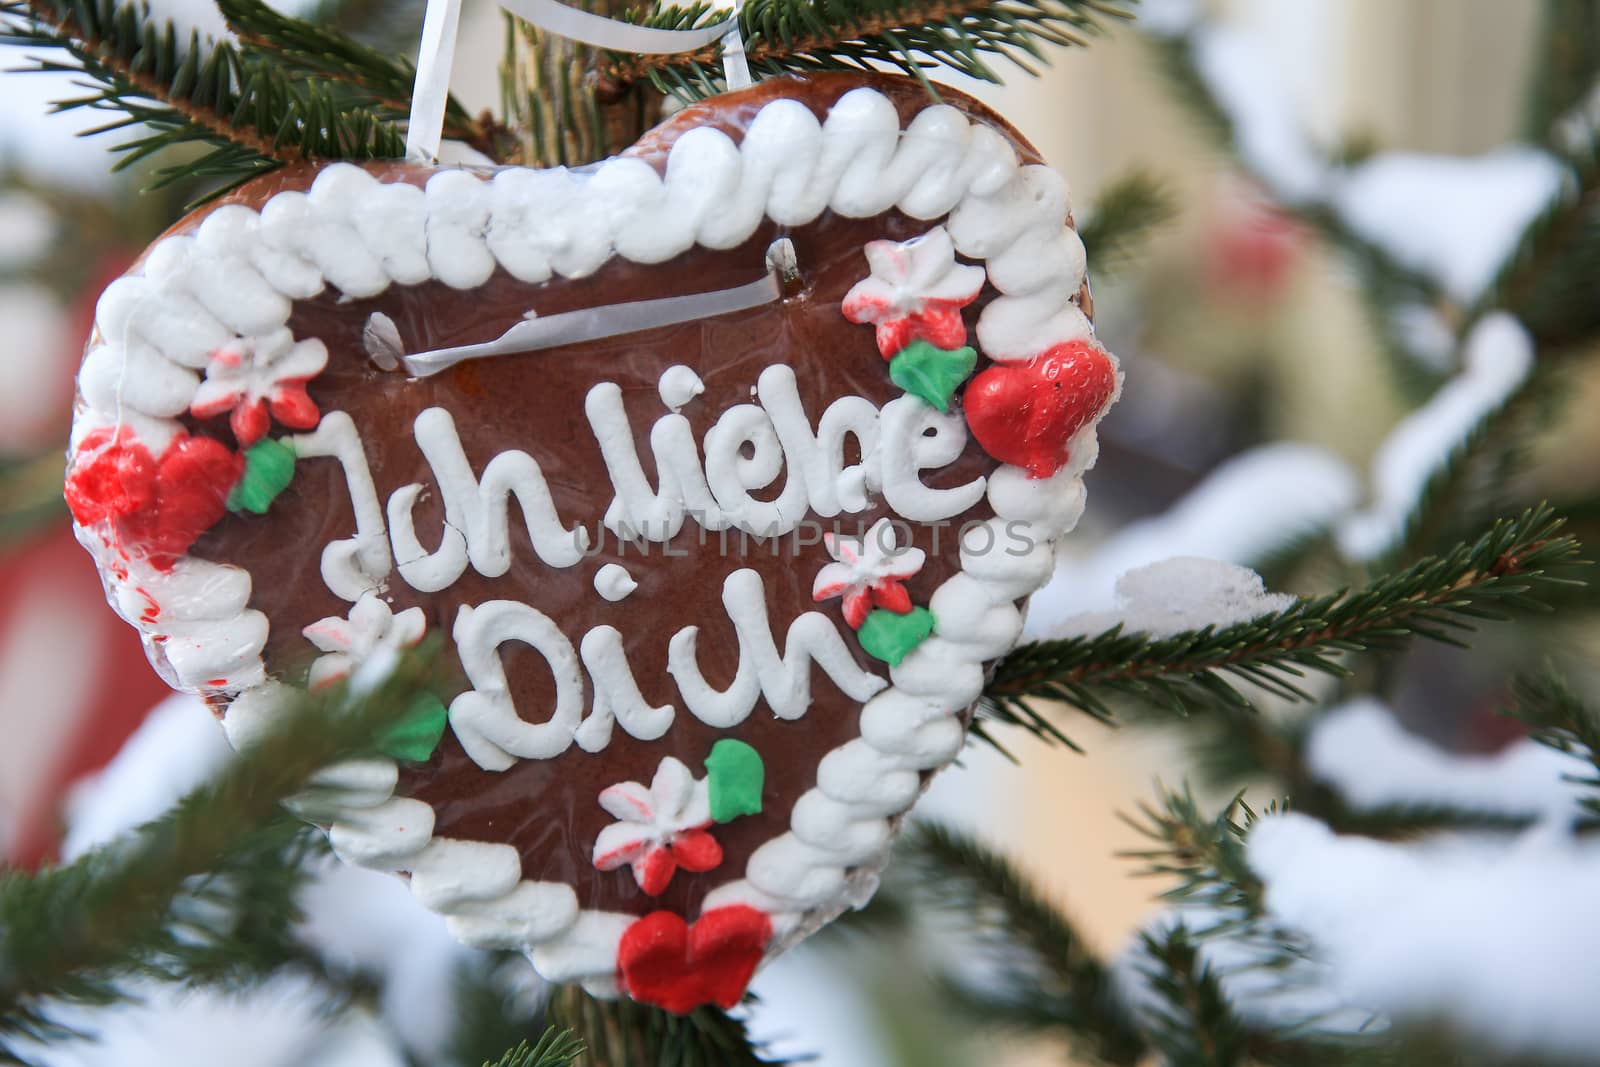 German gingerbread heart with the words "Ich liebe dich" translates into "I love you" in English